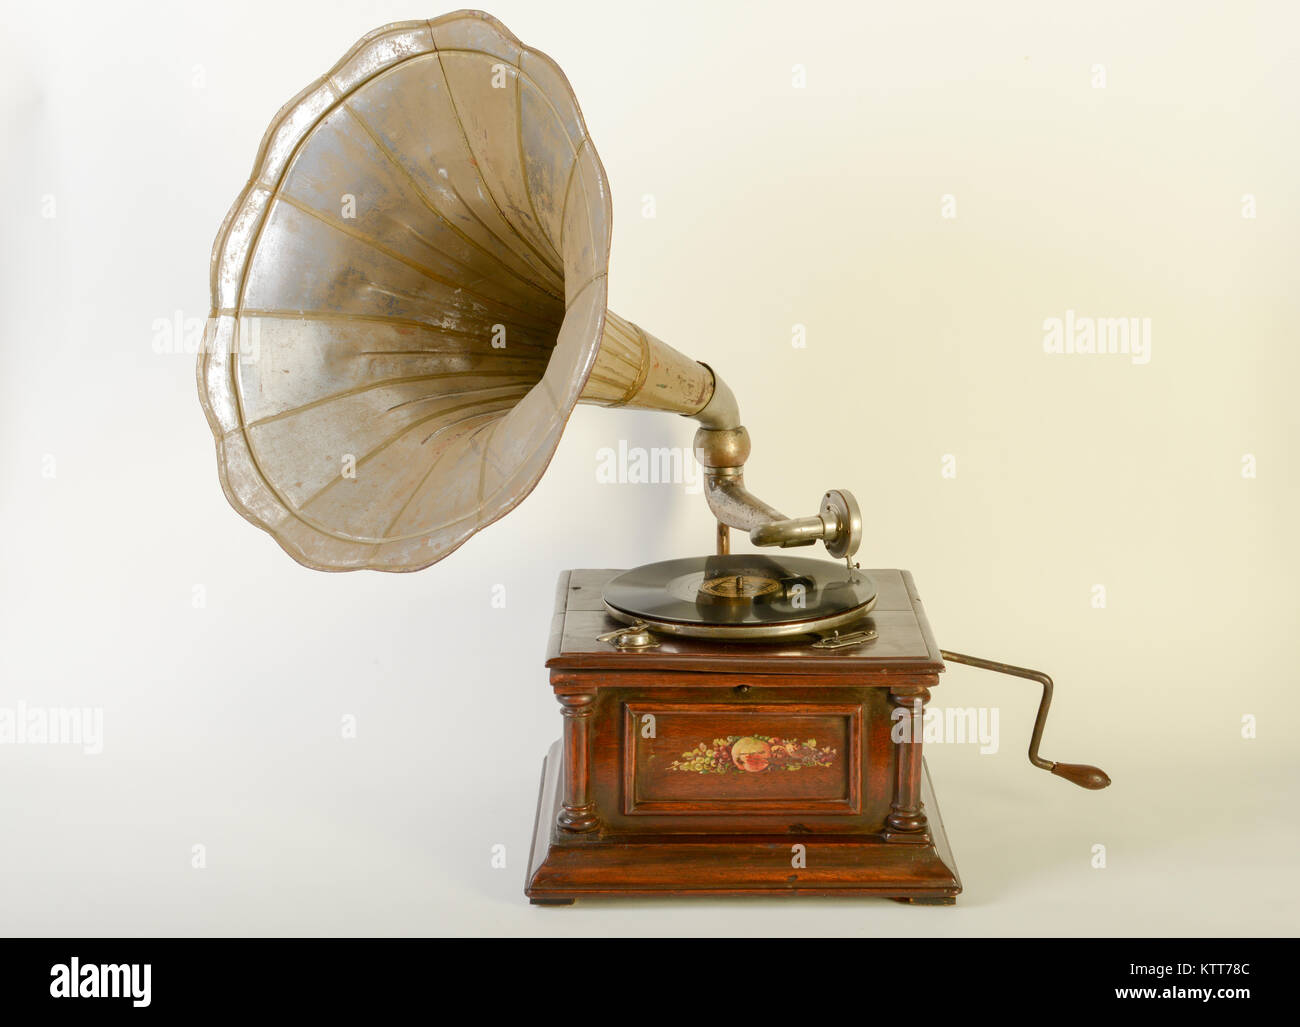 Vintage gramophone with horn speaker isolated on white Stock Photo